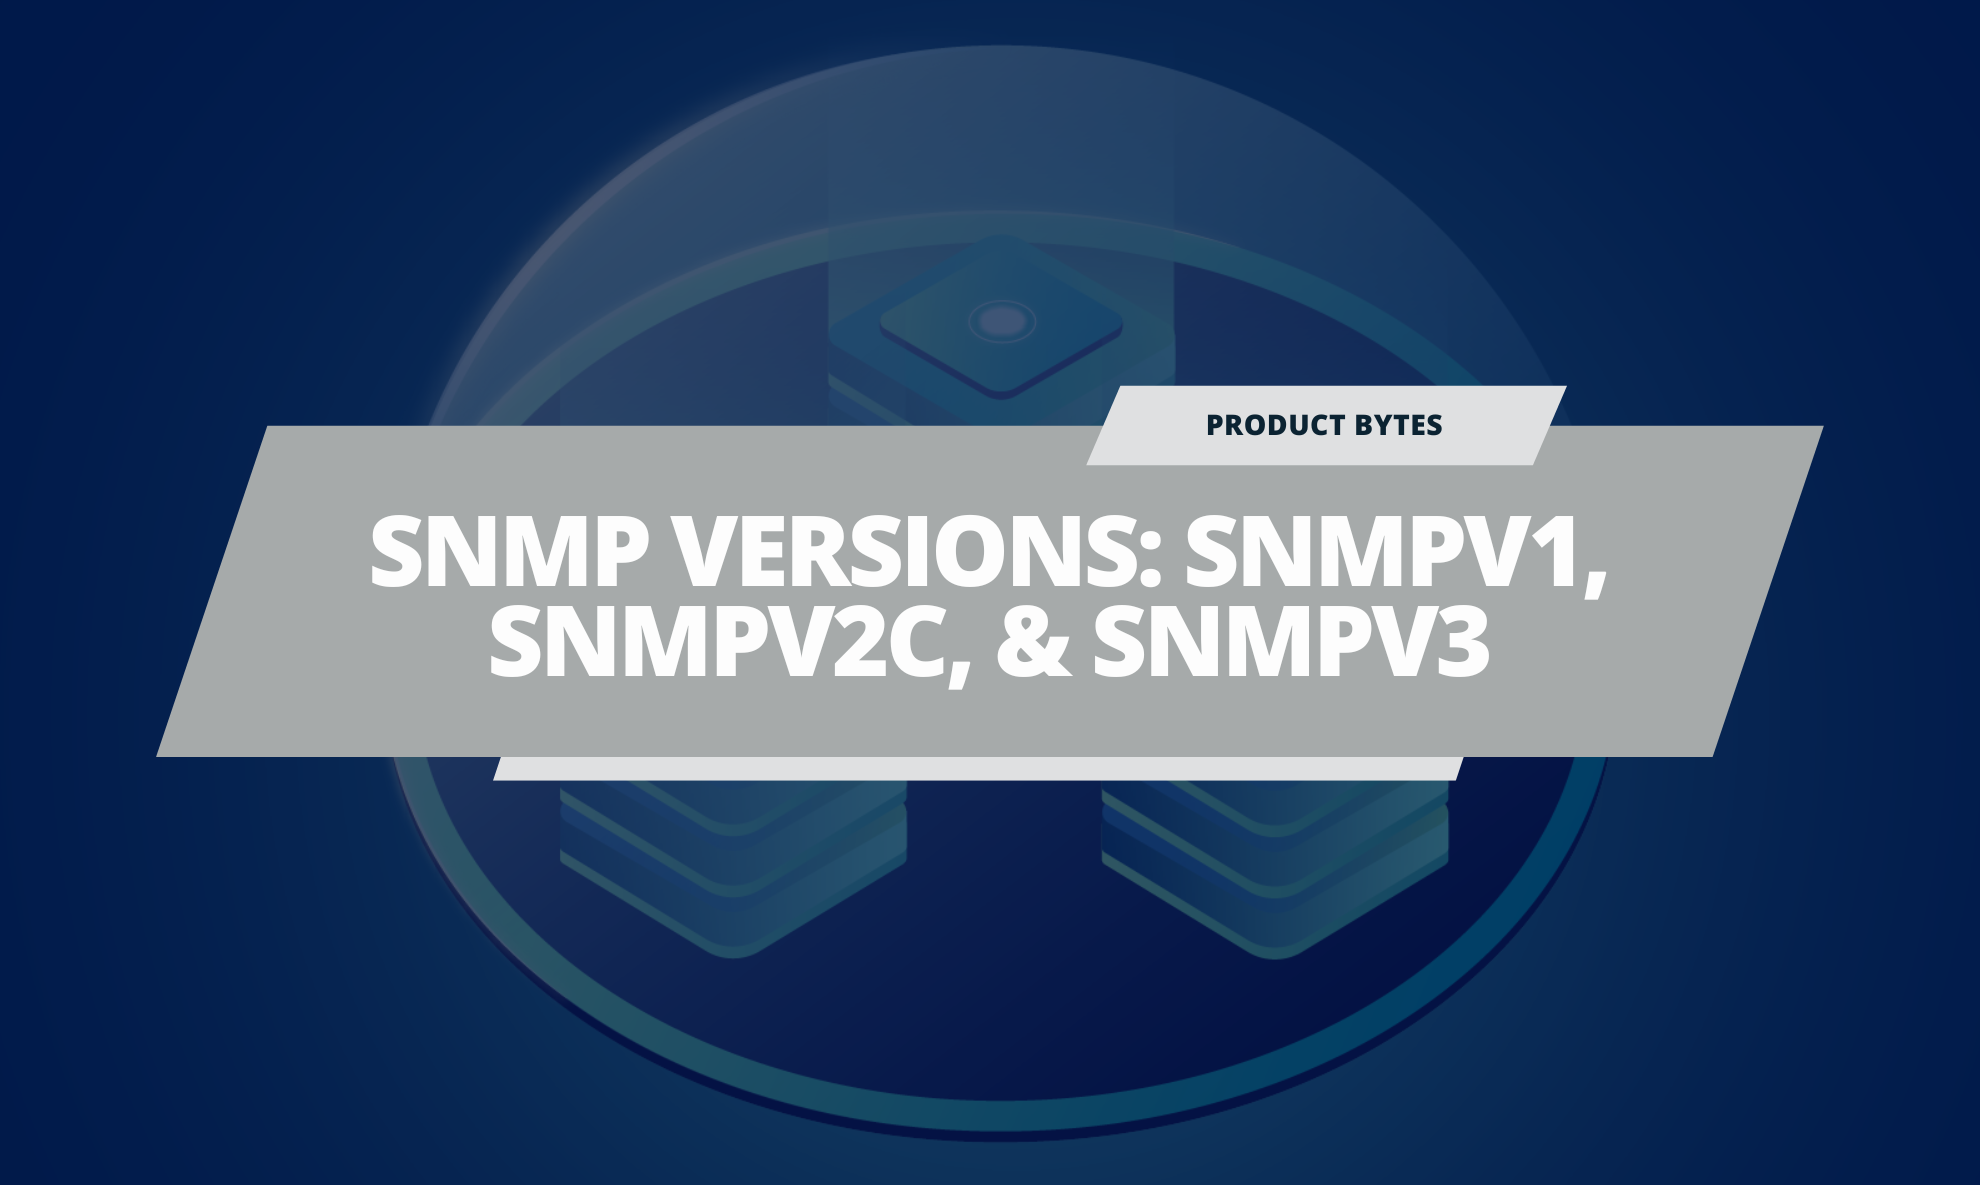 SNMP v1, v2, and v3: What Are the Different SNMP Versions?